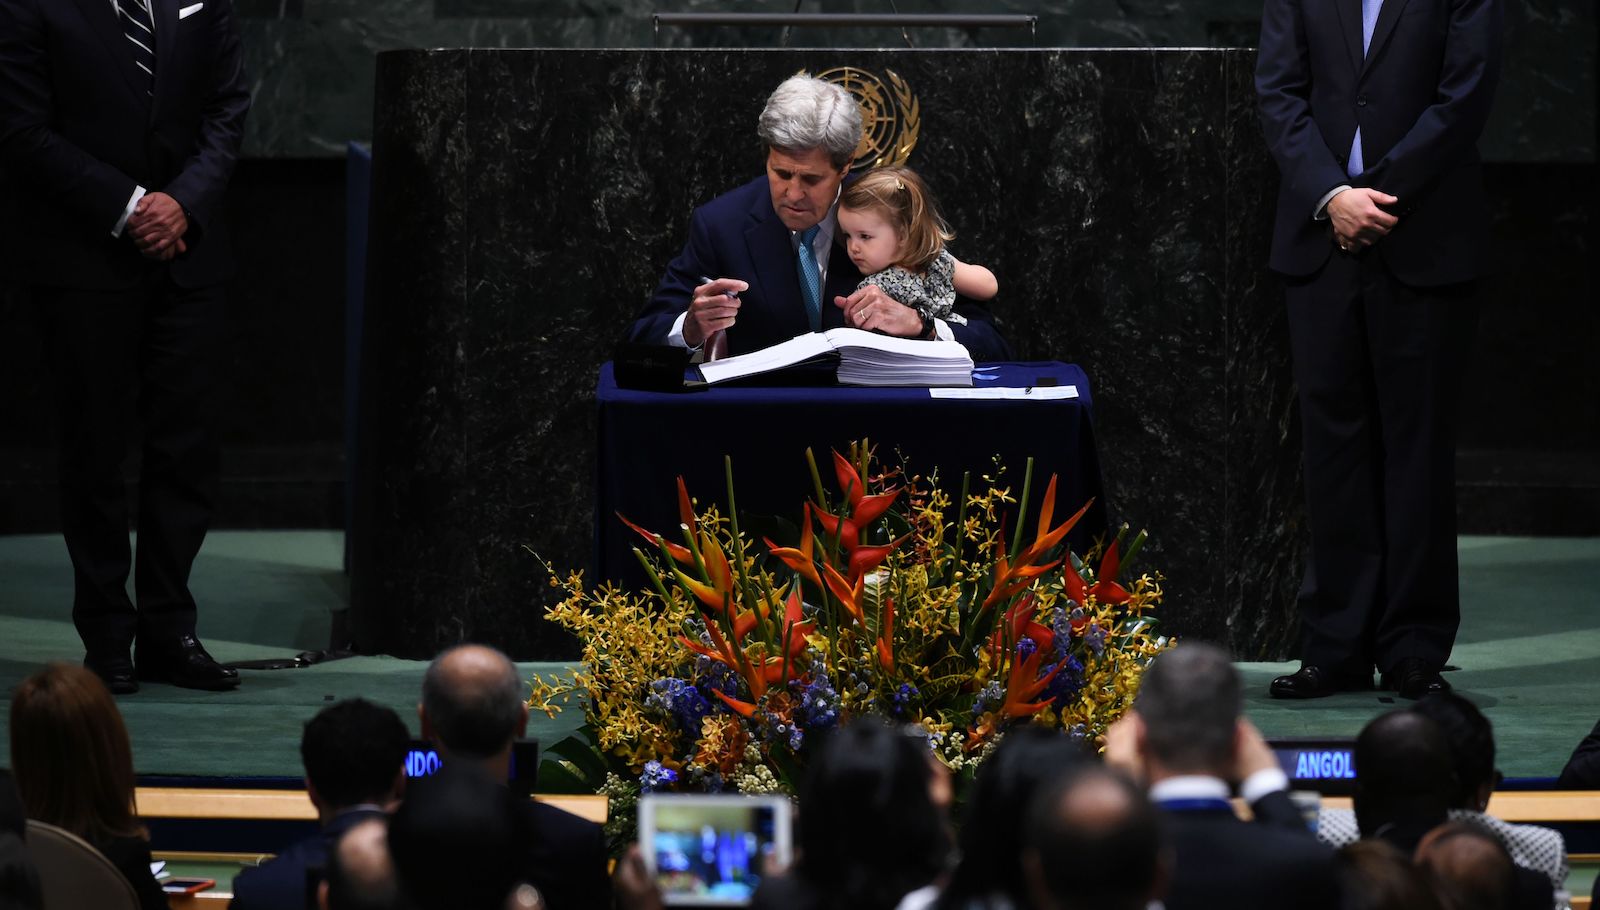 US Secretary of State John Kerry holds his granddaughter, Isabelle Dobbs-Higginson, during the signature ceremony for the Paris Agreement at the United Nations General Assembly Hall in April 2016.